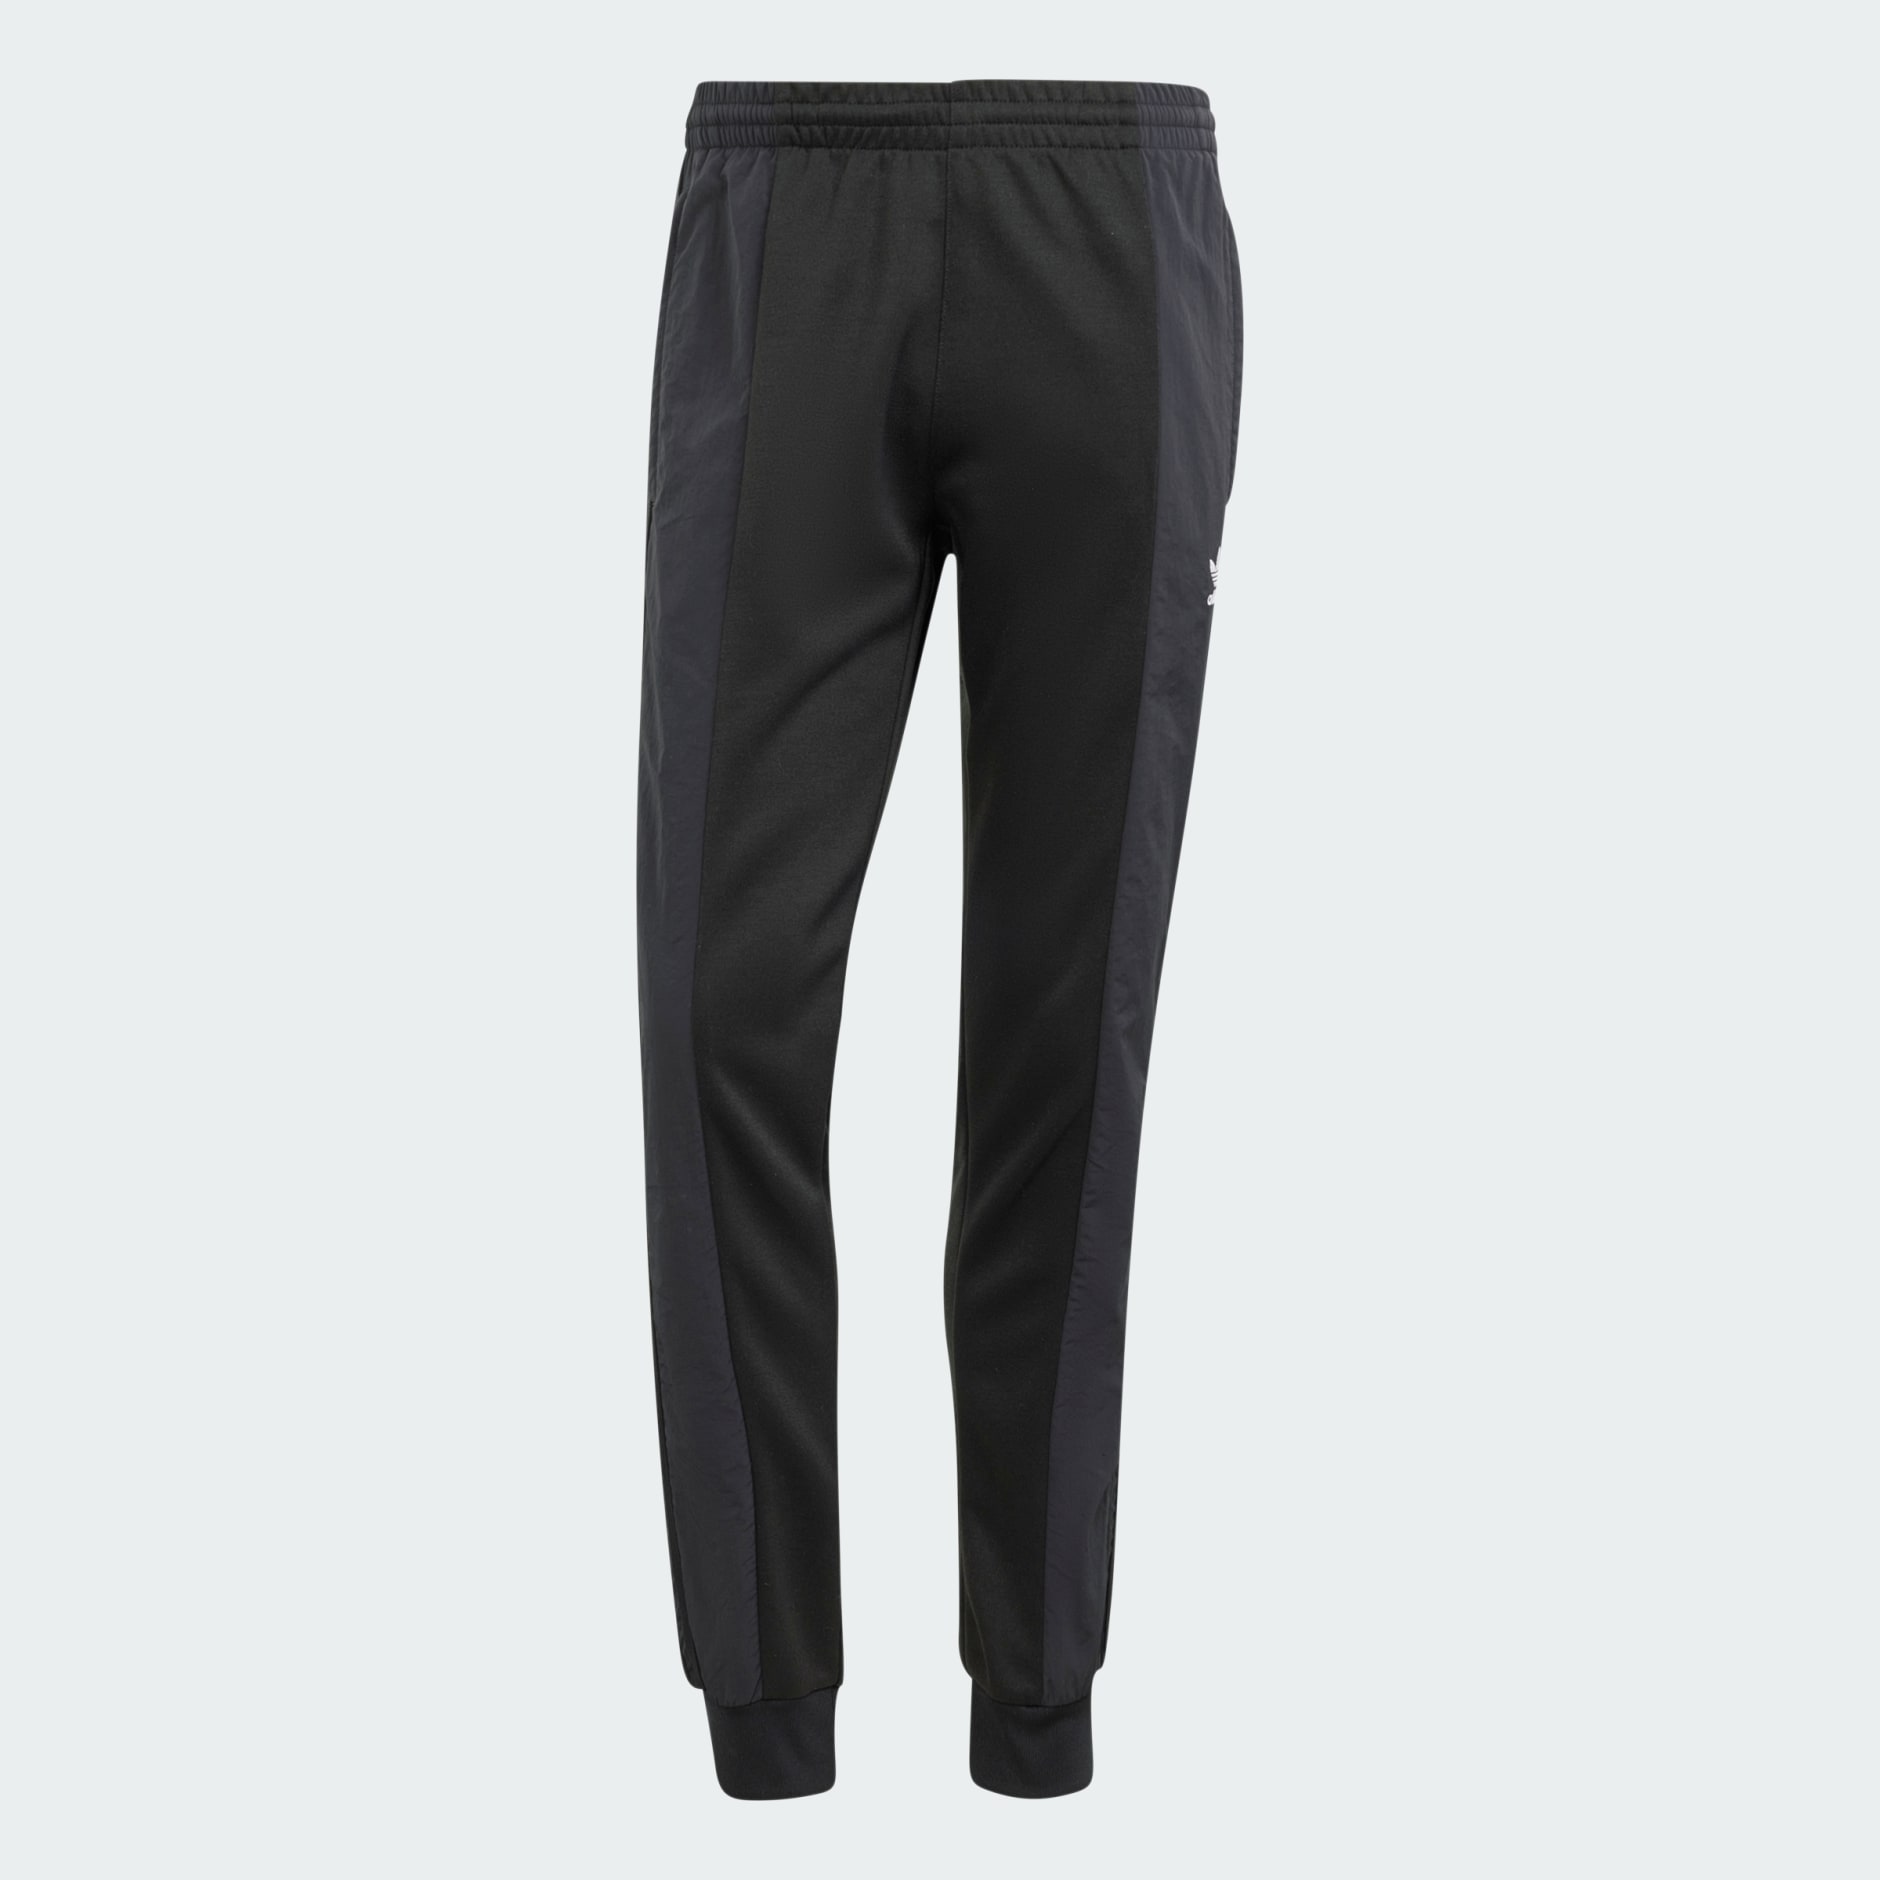 Clothing - Adicolor Re-Pro SST Material Mix Track Pants - Black ...